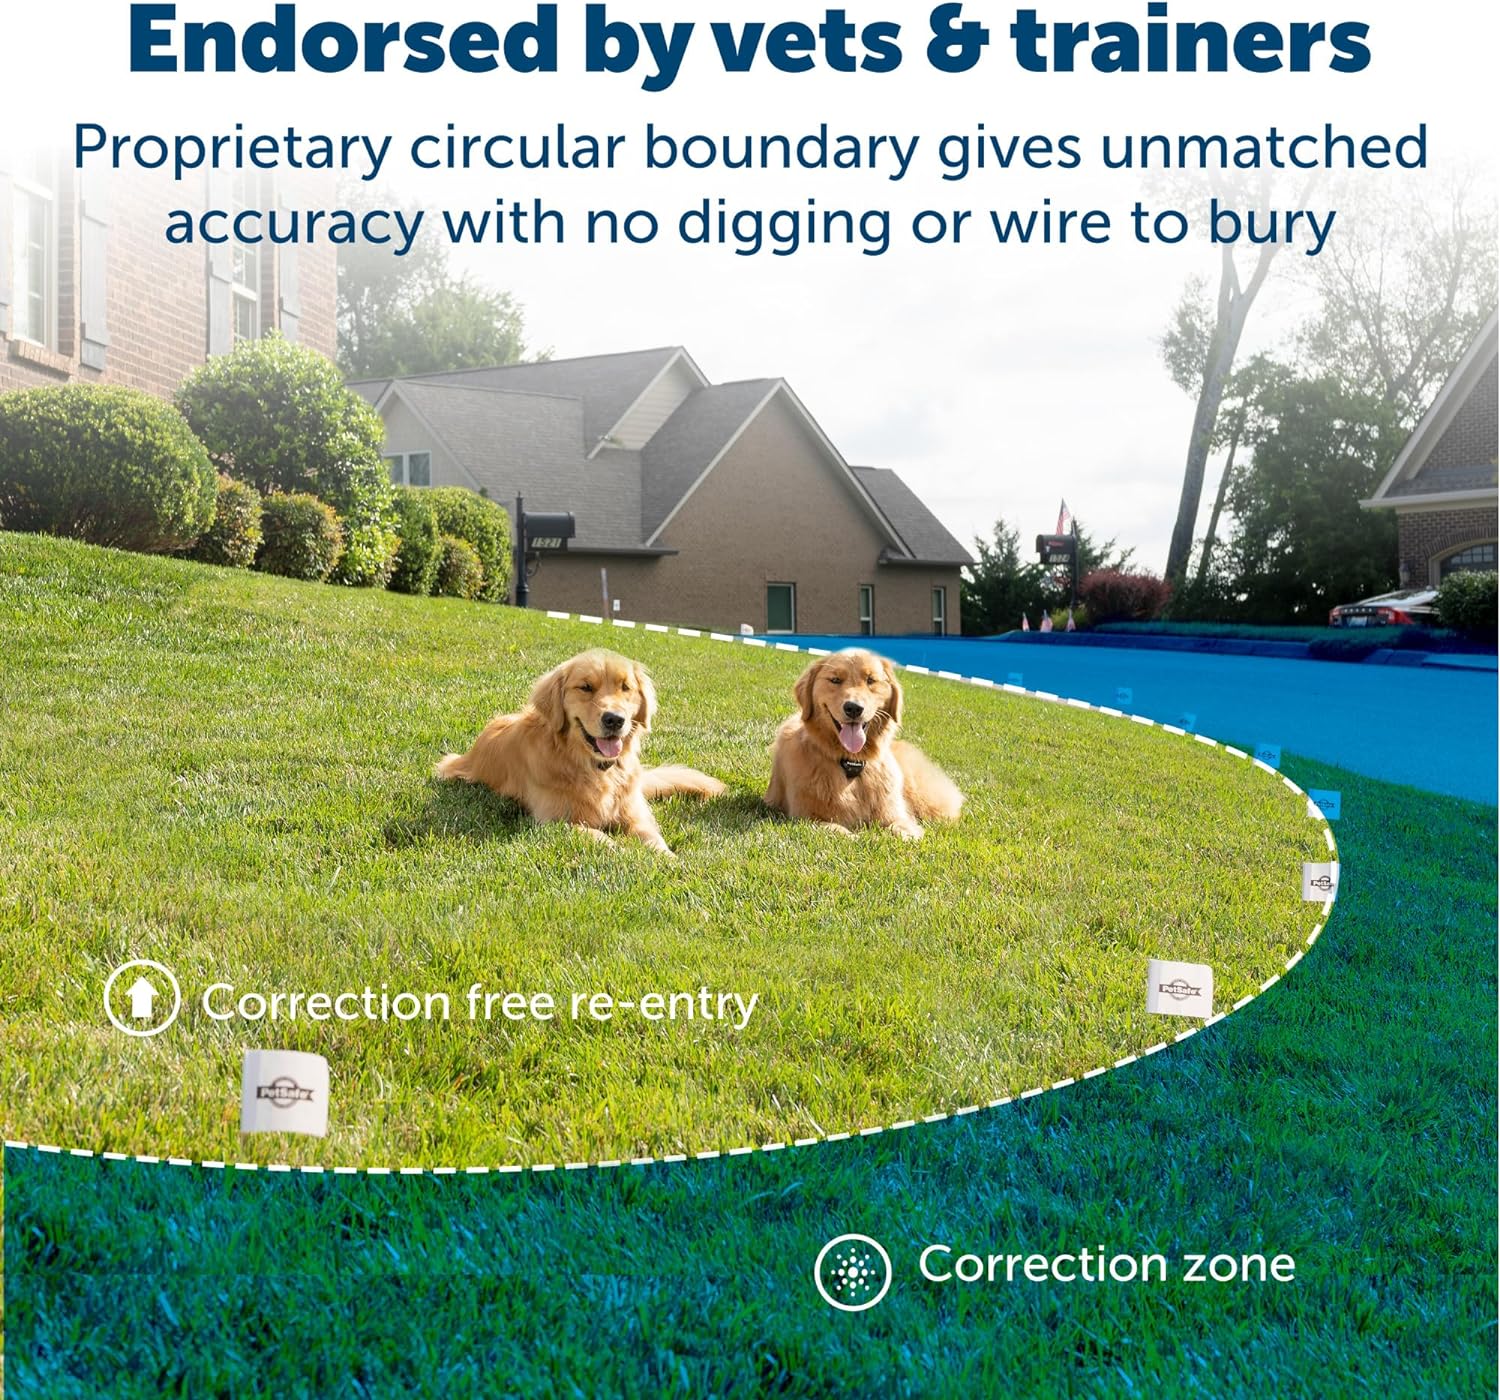 PetSafe Stay  Play Compact Wireless Pet Fence, No Wire Circular Boundary, Secure up to 3/4 Acre, No-Dig Portable Fencing, Americas Safest Wireless Fence From Parent Company INVISIBLE FENCE Brand